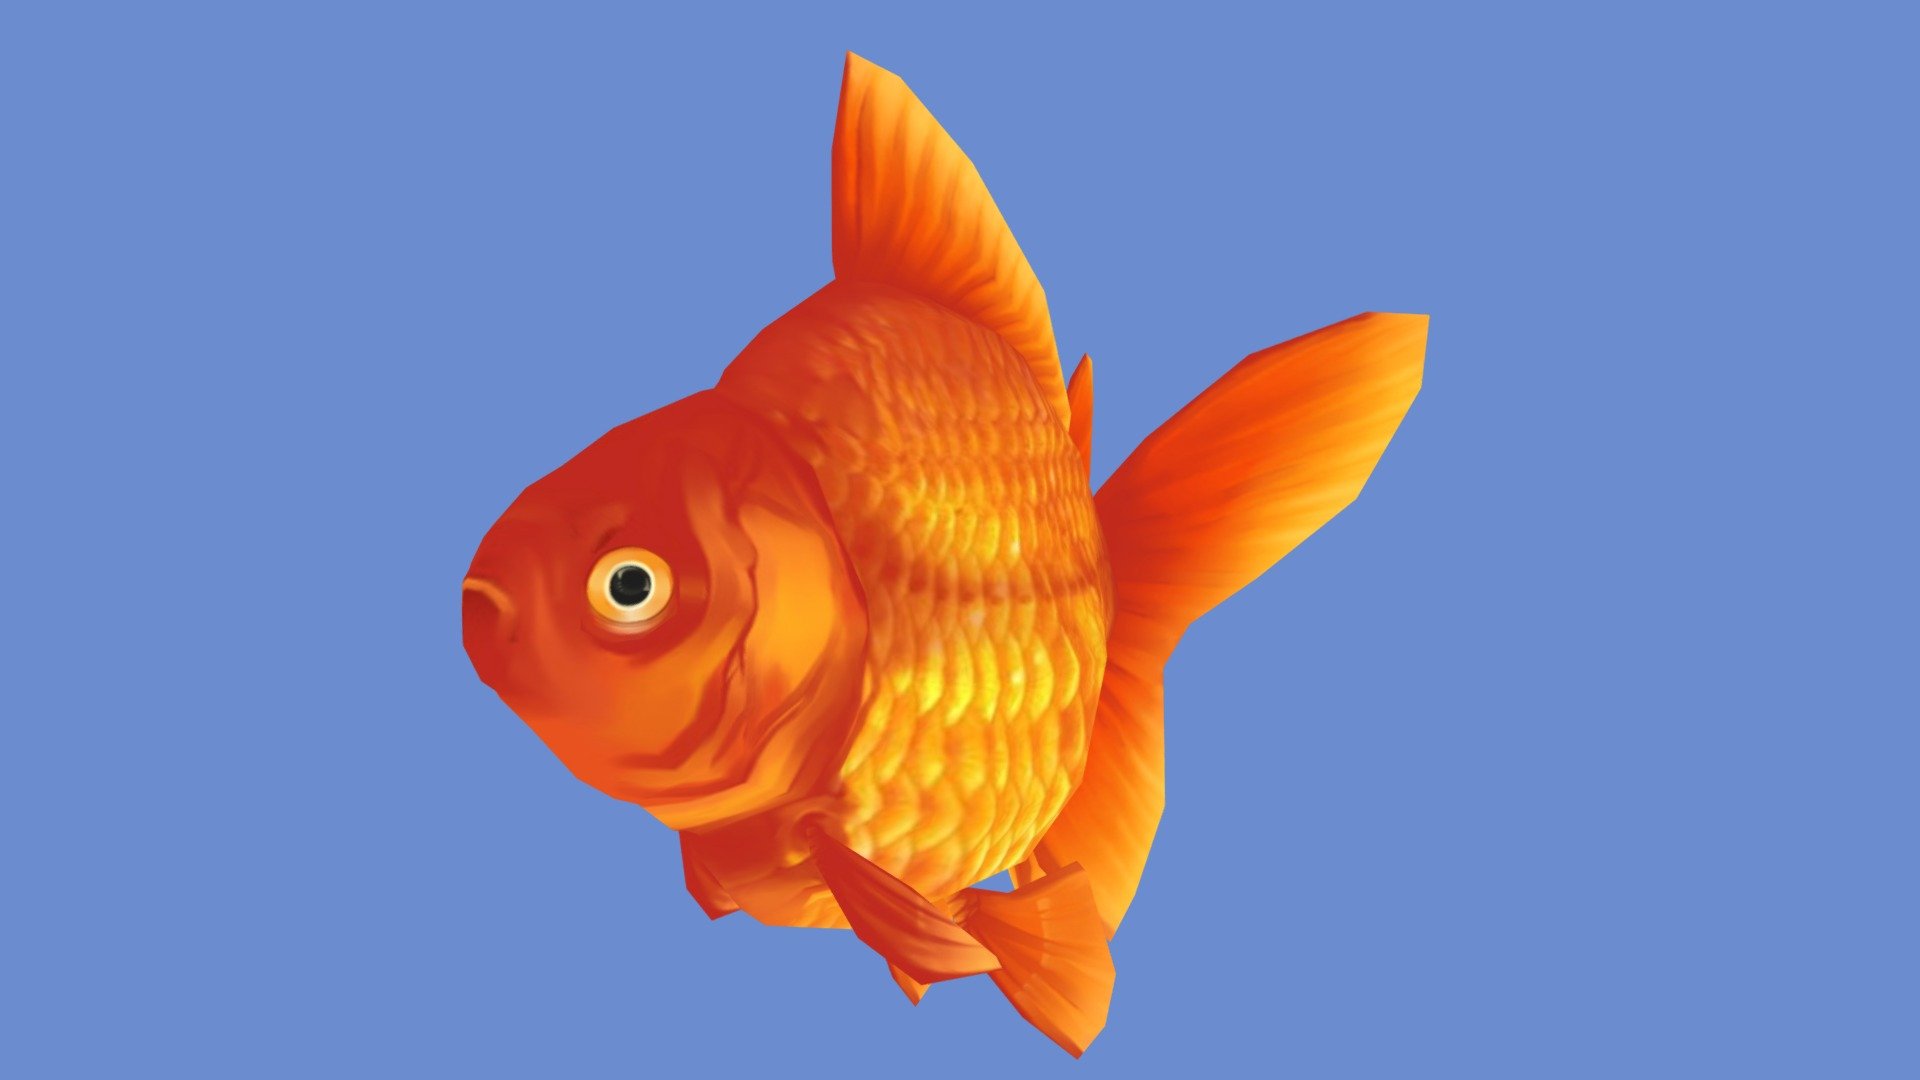 The Goldfish is 394 Poly and on a 512 x 512 diffuse map 3d model